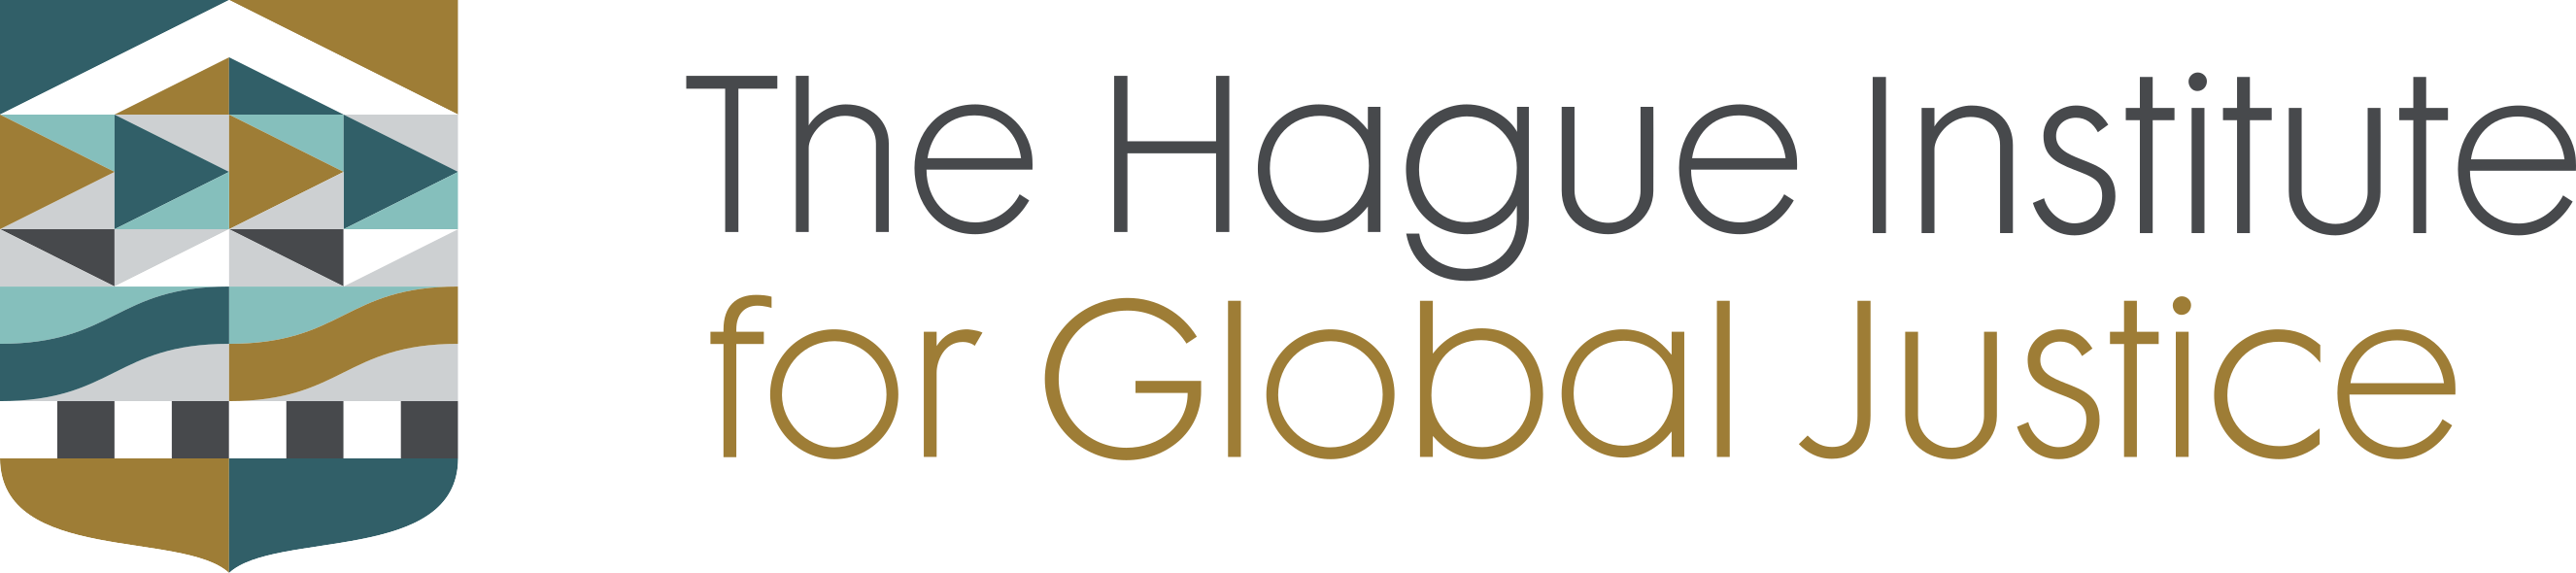 The Hague Institute for Global Justice